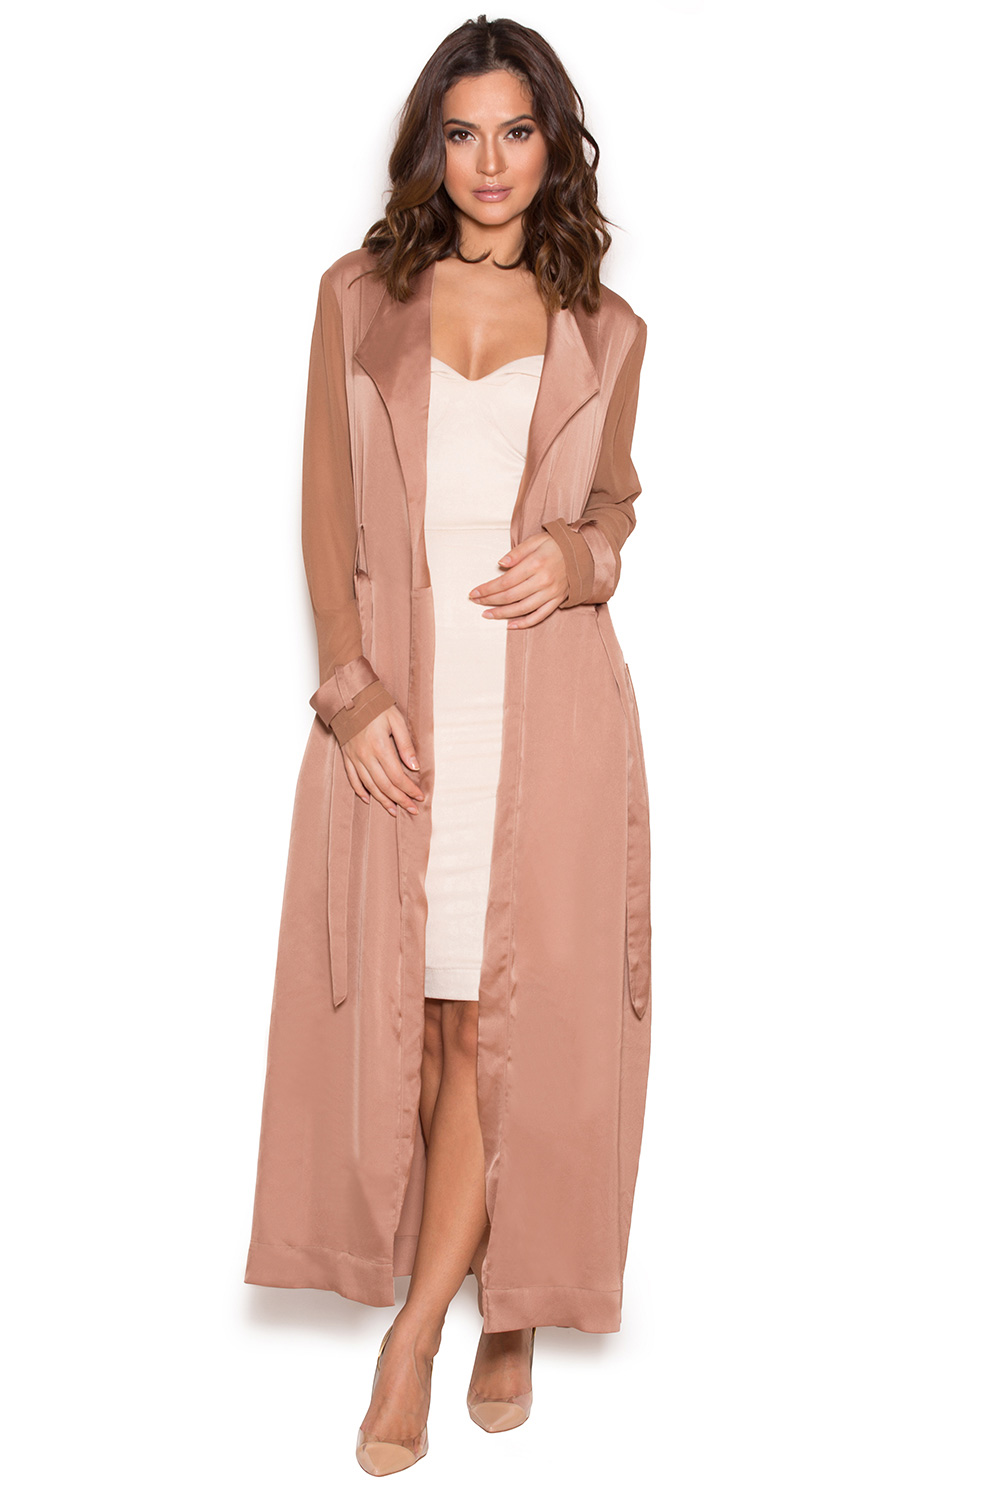 Clothing : Jackets : 'Coryn' Rose Gold Silky Duster Coat